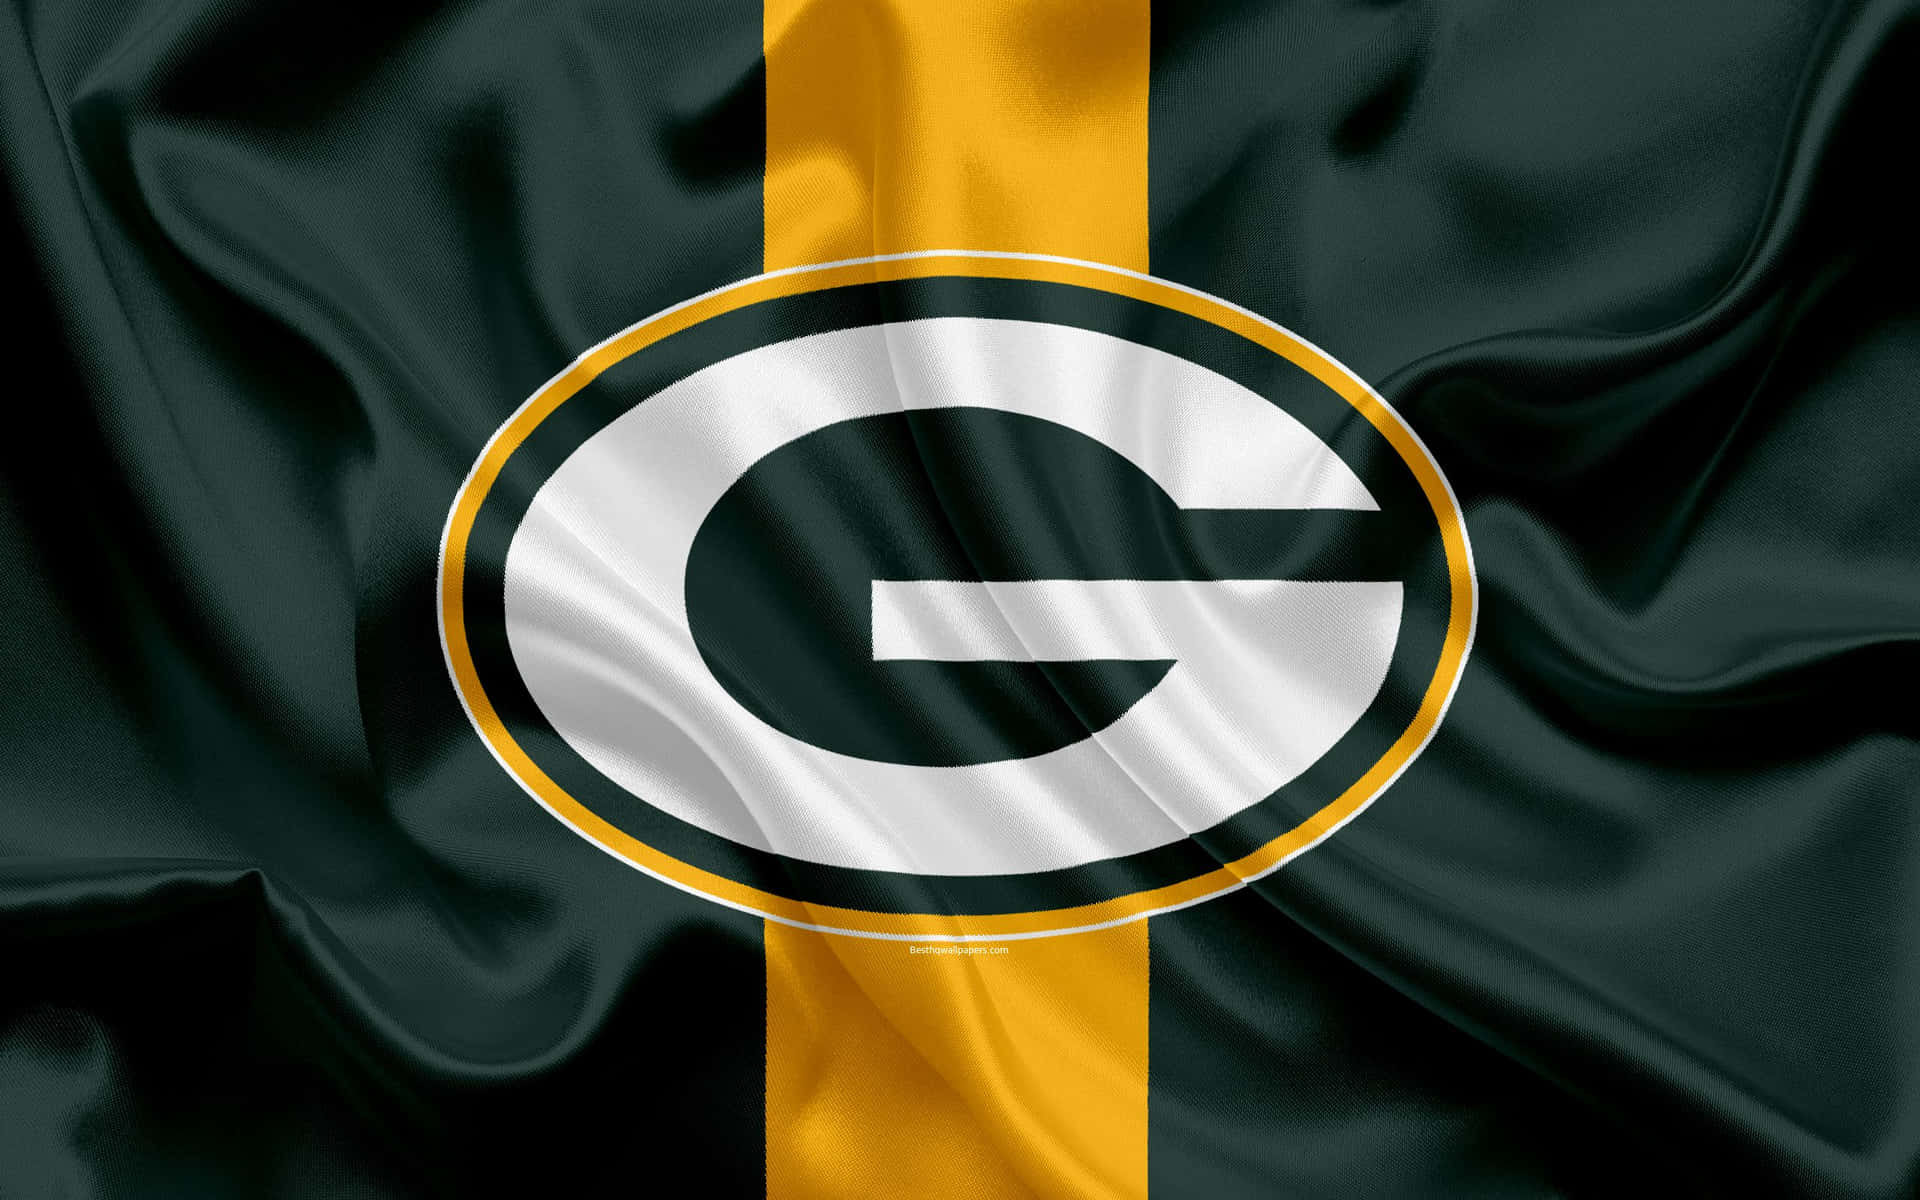 Green Bay Packers team logo and stadium in stunning resolution